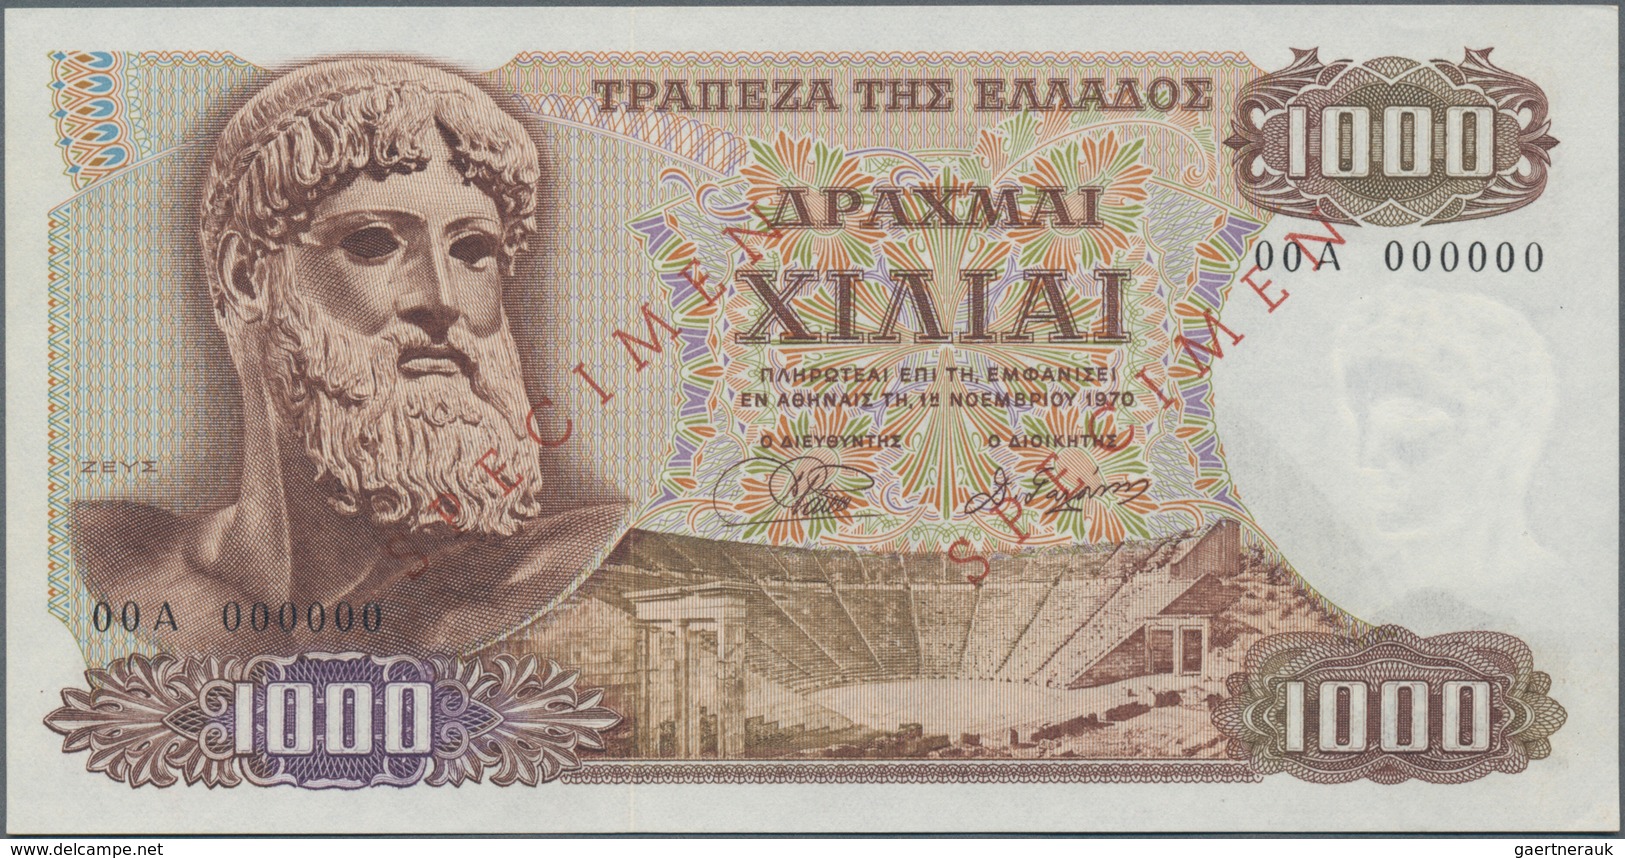 Greece / Griechenland: 1000 Drachmai 1970 SPECIMEN, P.198bs, Serial Number 00A 000000 And Red Overpr - Grecia